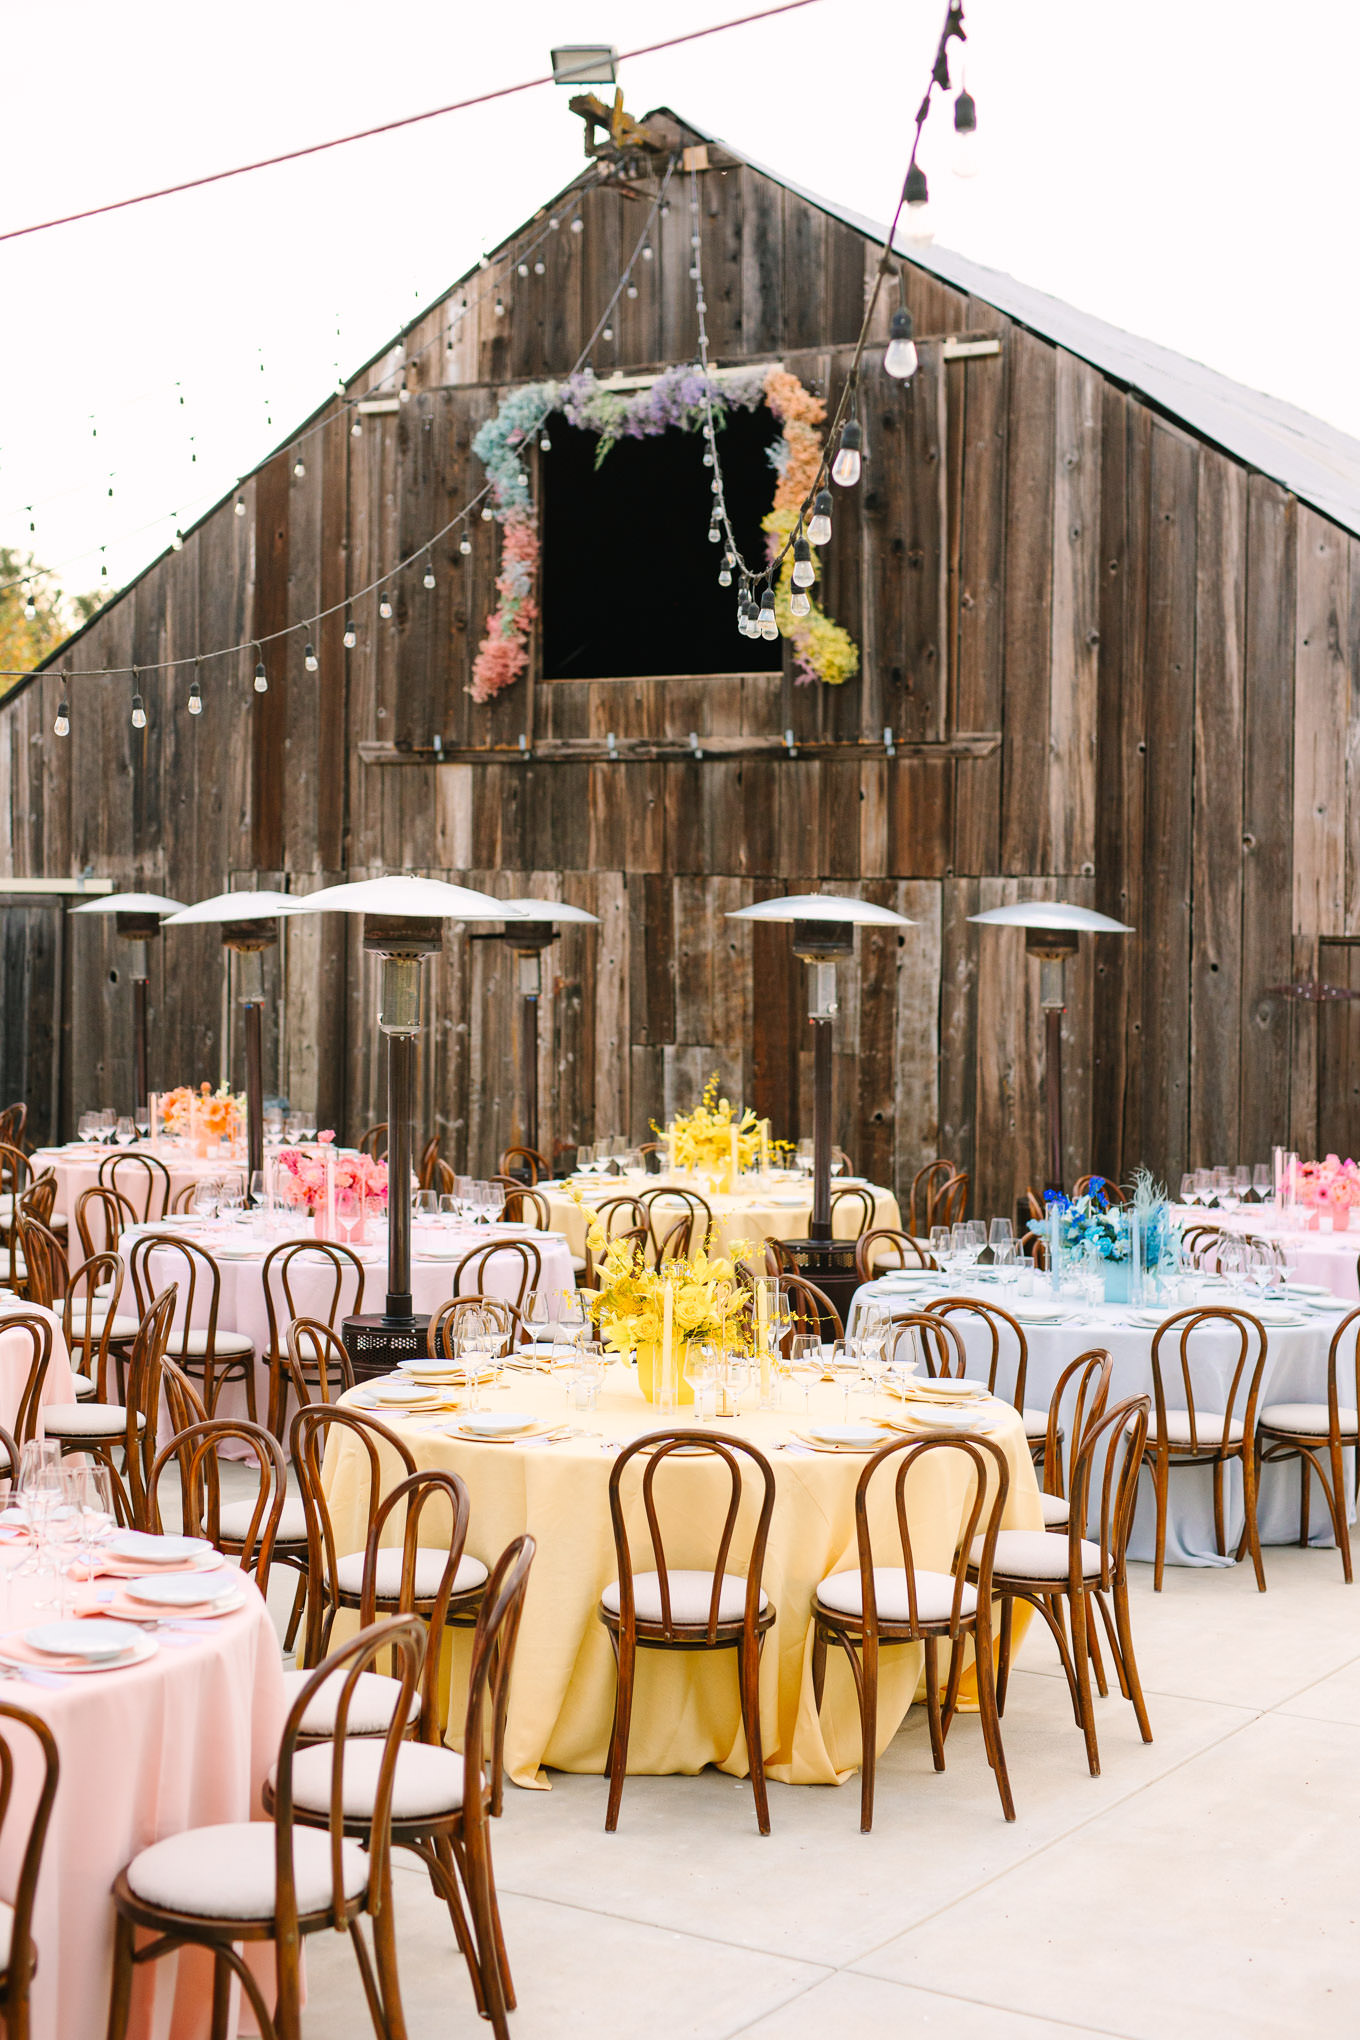 Monochromatic pastel wedding tables | Colorful and quirky wedding at Higuera Ranch in San Luis Obispo | #sanluisobispowedding #californiawedding #higueraranch #madonnainn   Source: Mary Costa Photography | Los Angeles